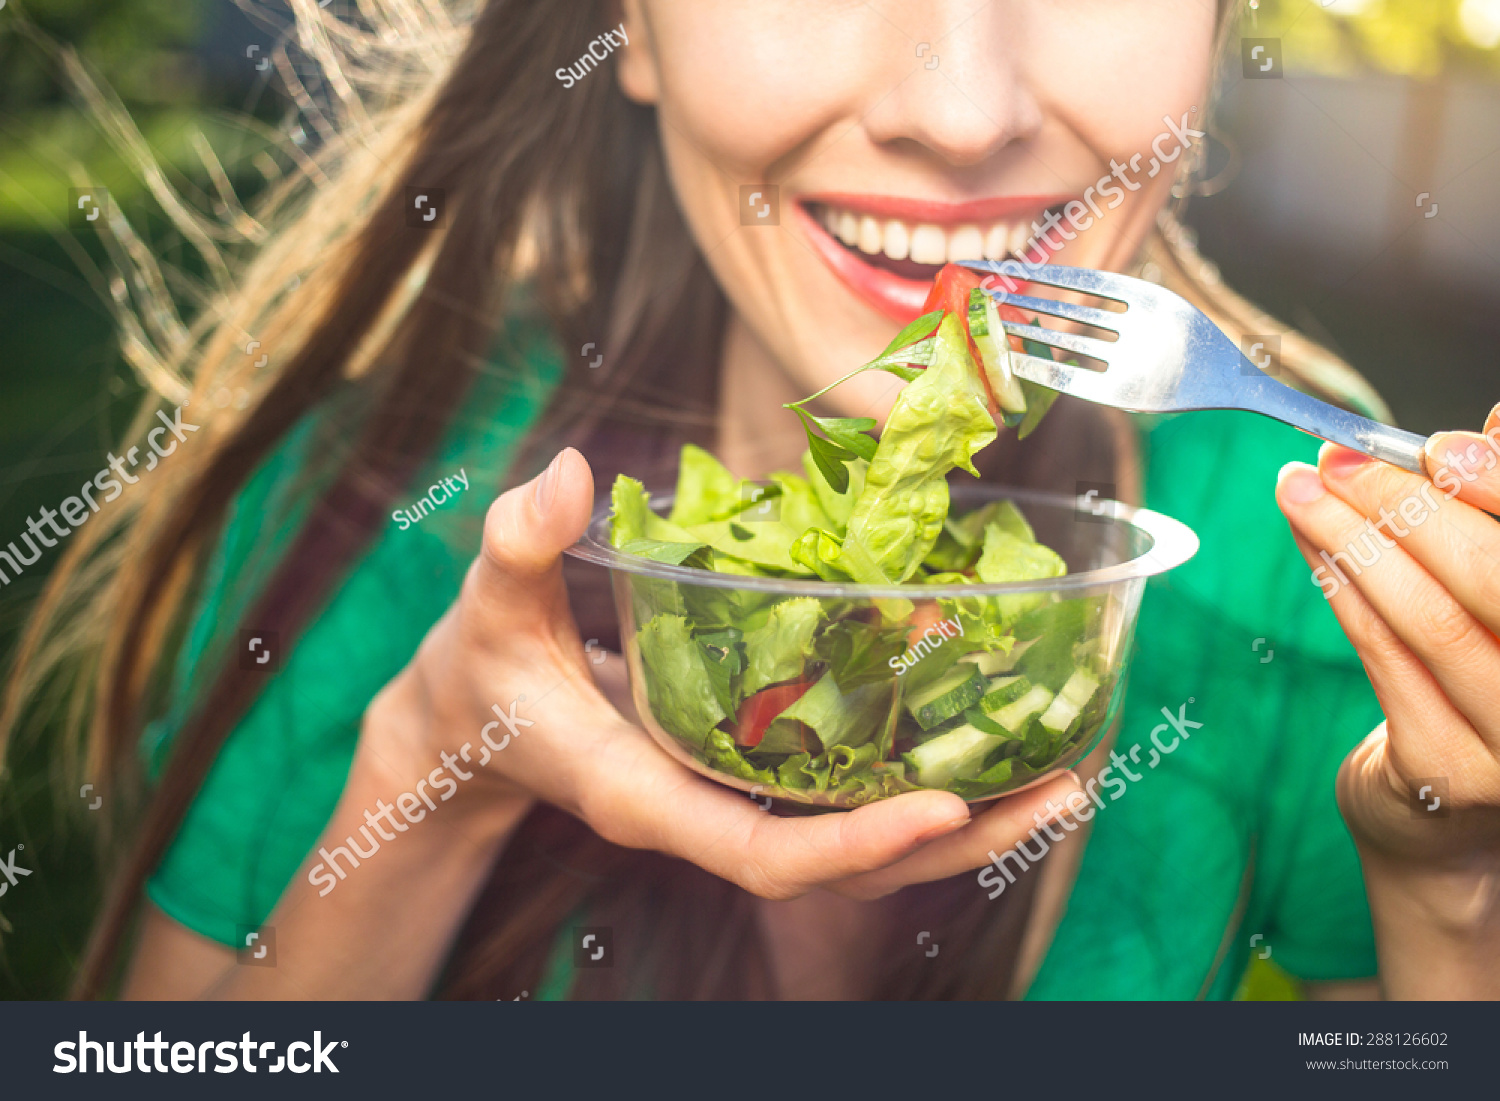 Portrait of attractive caucasian smiling woman eating salad, focus on hand and fork. soft, backlight #288126602